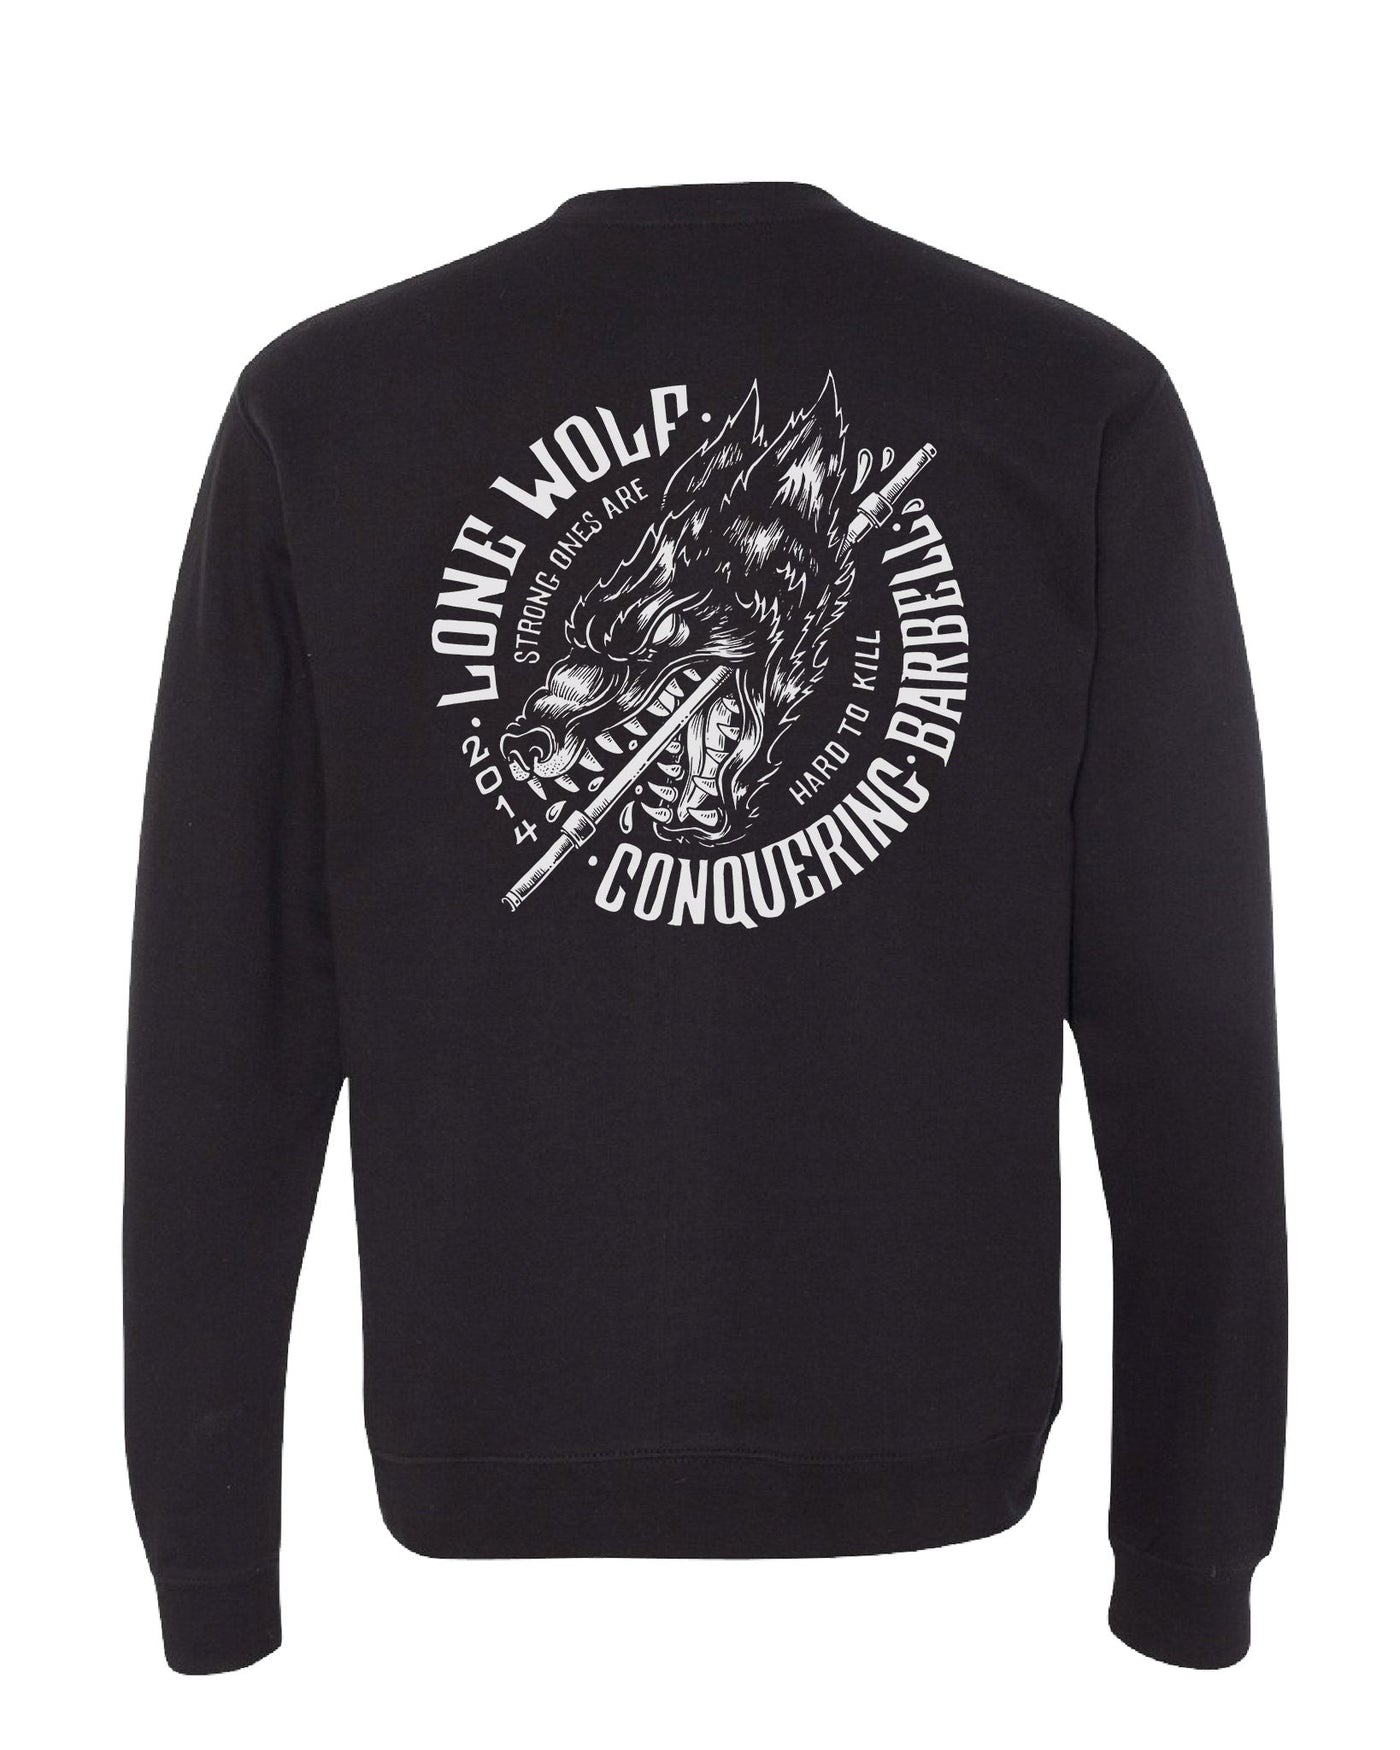 Lone Wolf - Black - Crewneck - Conquering Barbell